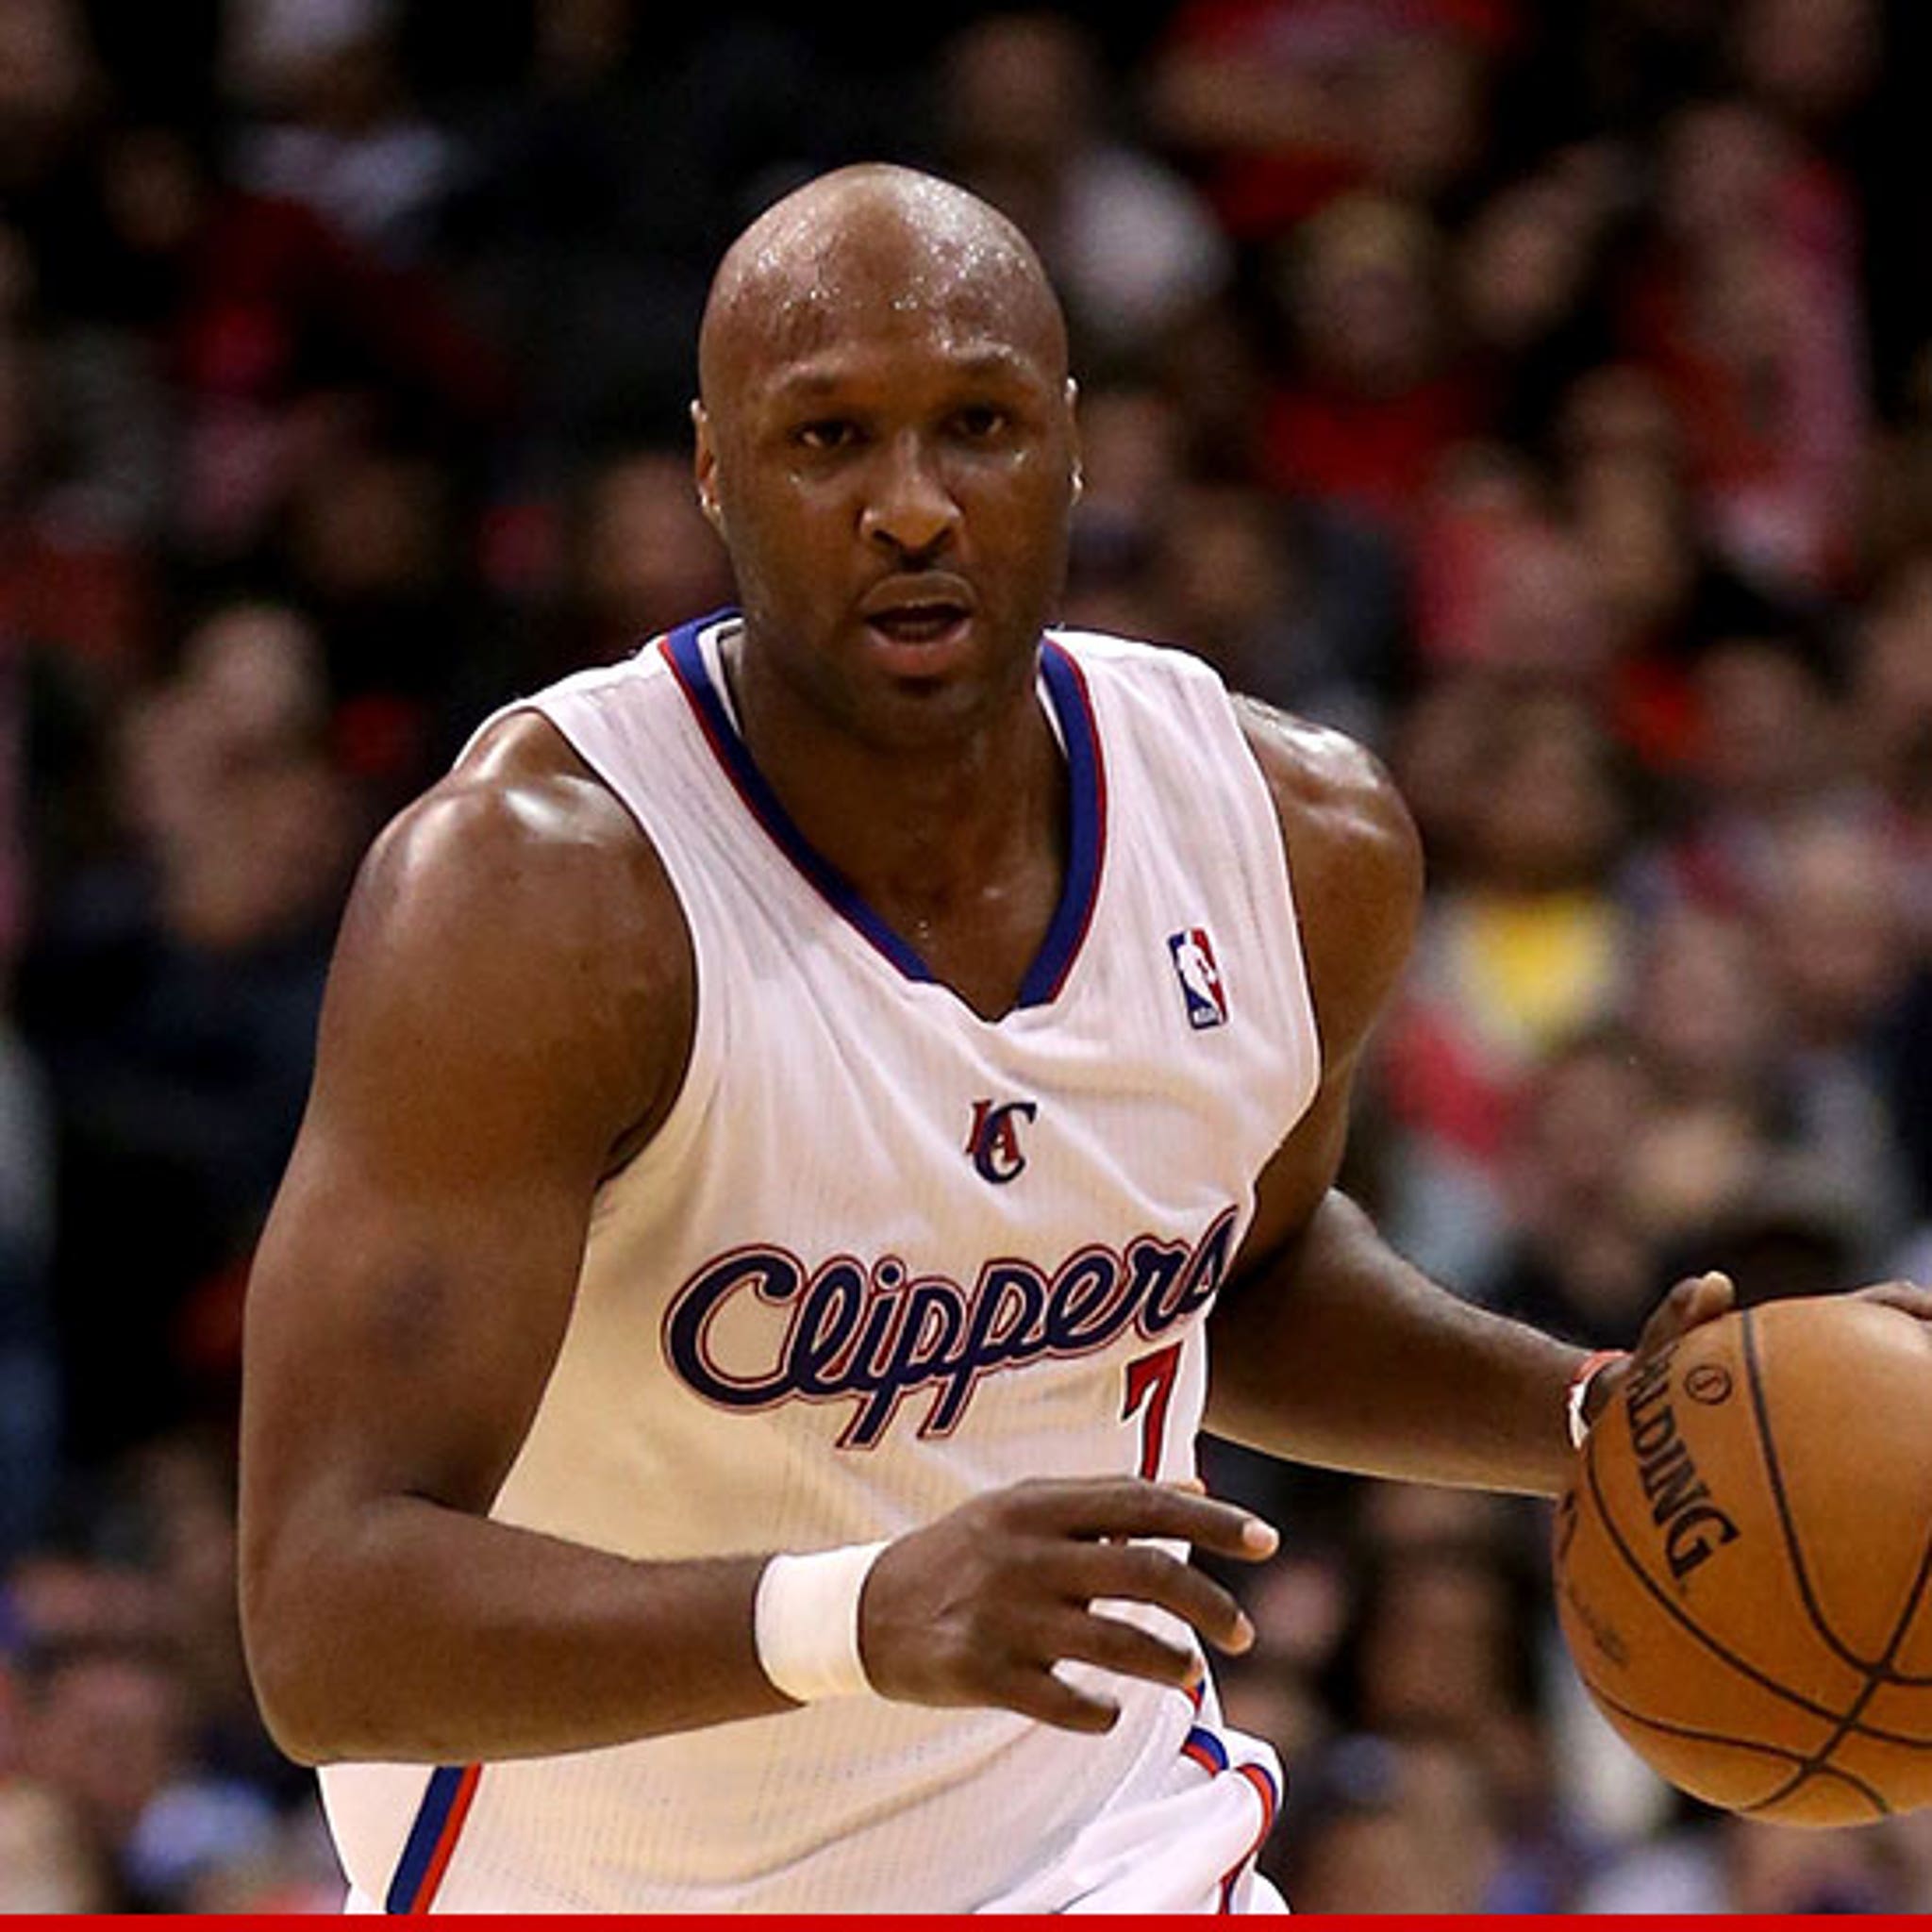 Lamar Odom says Lakers fans should root for Clippers as form of